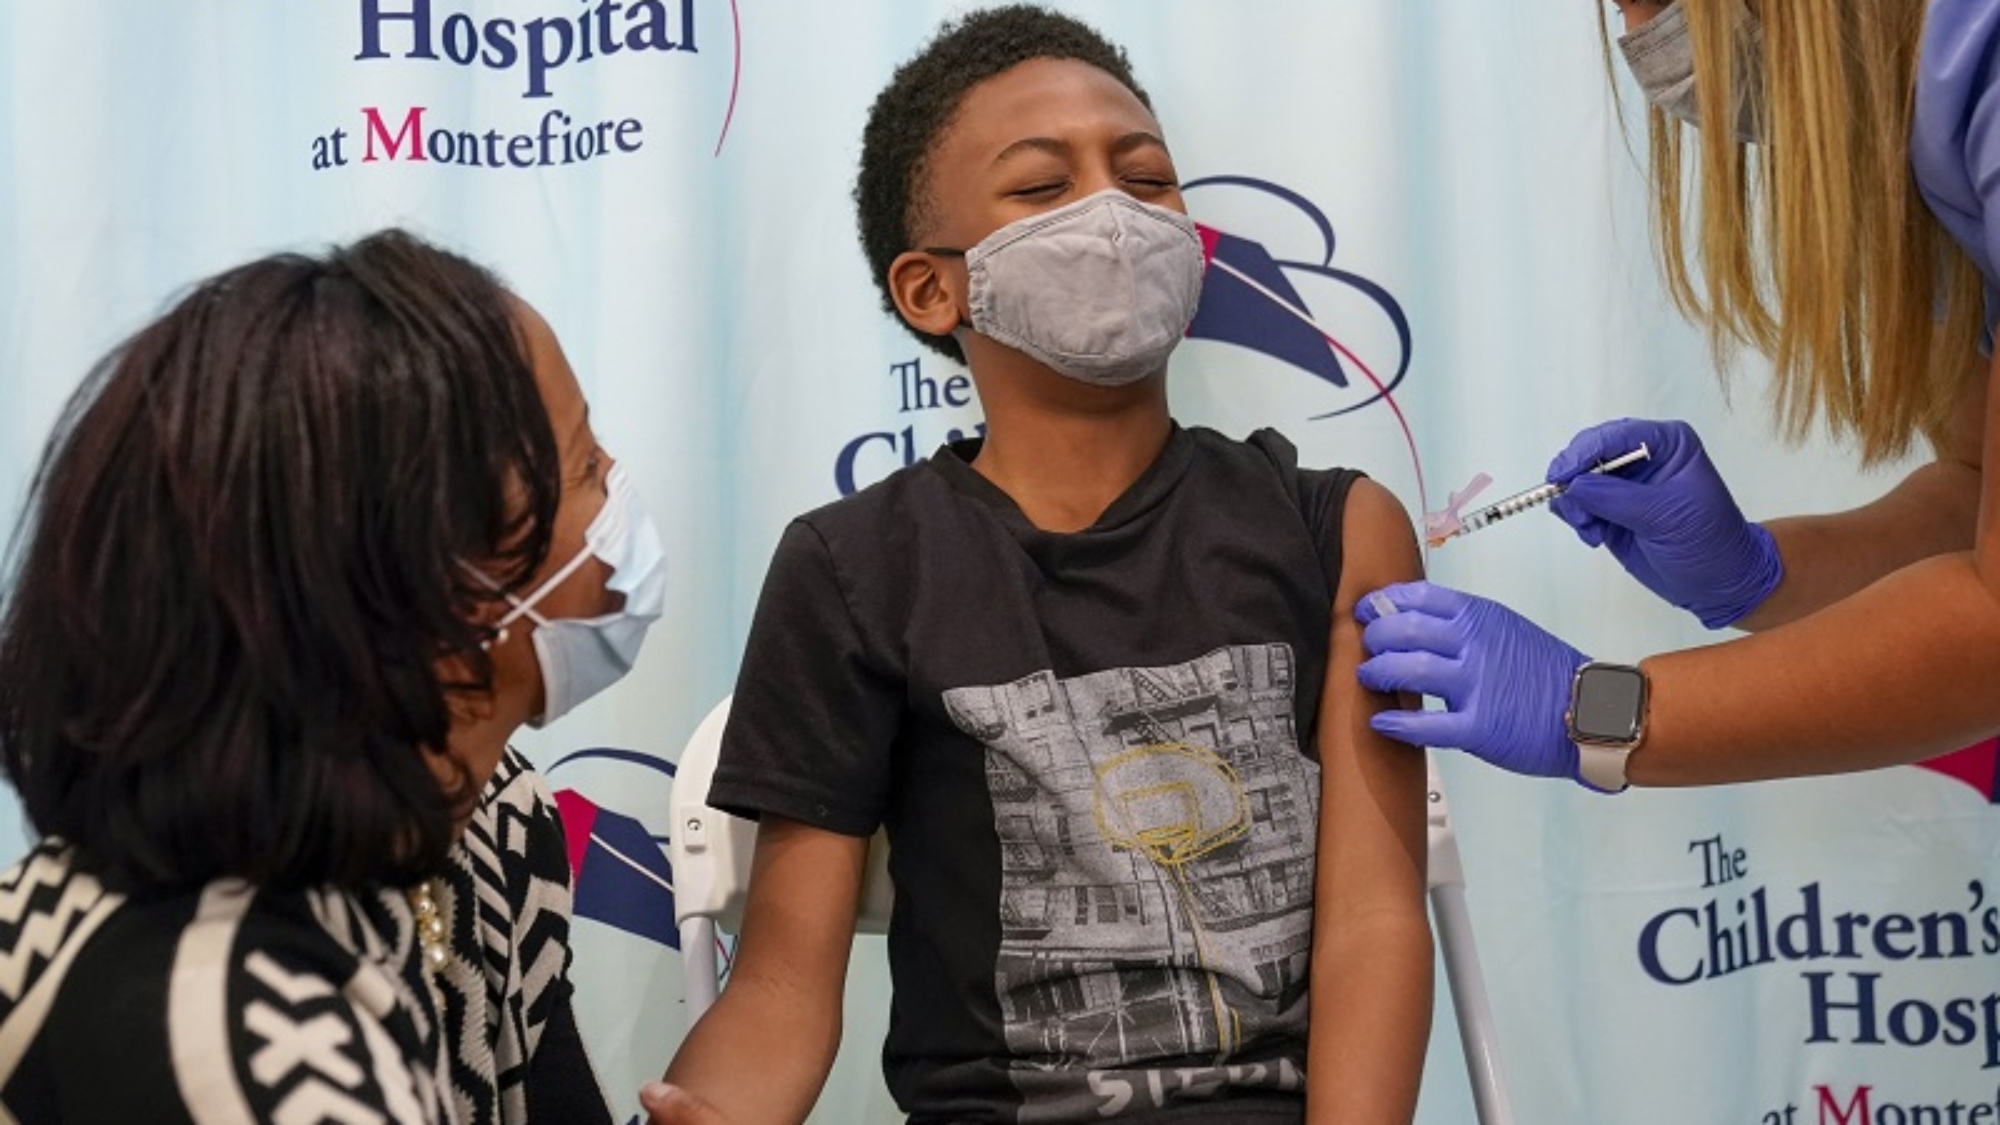 Dr. Rhonda Achonolu comforts her son Kenechi, 9, as he is inoculated with first dose of the Pfizer-BioNTech COVID-19 vaccine for children five to 12 years at The Children's Hospital at Montefiore, Wednesday, Nov. 3, 2021, in the Bronx borough of New York. The U.S. enters a new phase Wednesday in its COVID-19 vaccination campaign, with shots now available to millions of elementary-age children in what health officials hailed as a major breakthrough after more than 18 months of illness, hospitalizations, deaths and disrupted education. (AP Photo/Mary Altaffer)